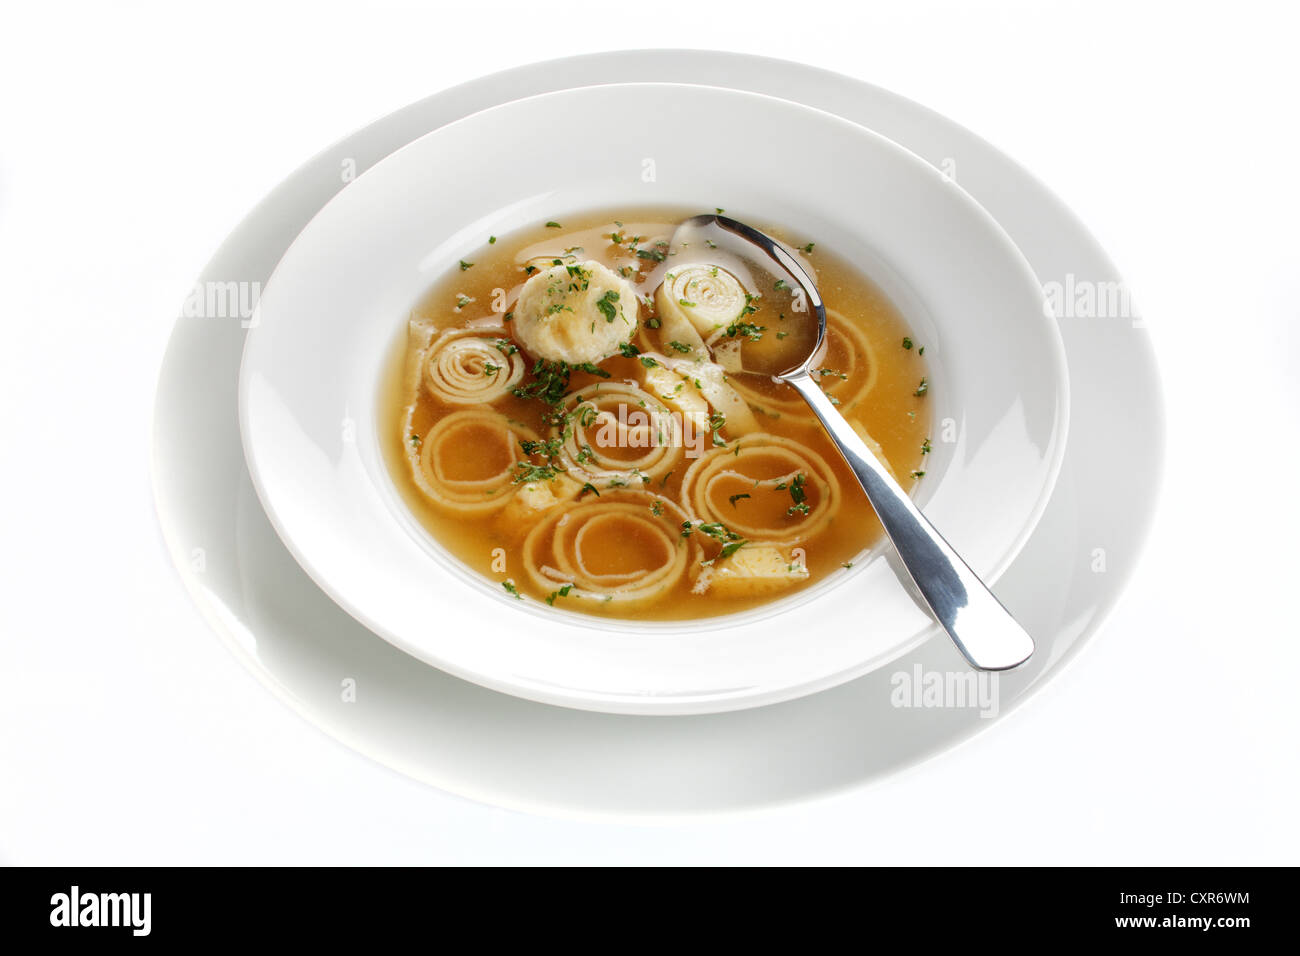 Wedding soup, beef stock with dumplings, sliced pancakes and egg Stock Photo